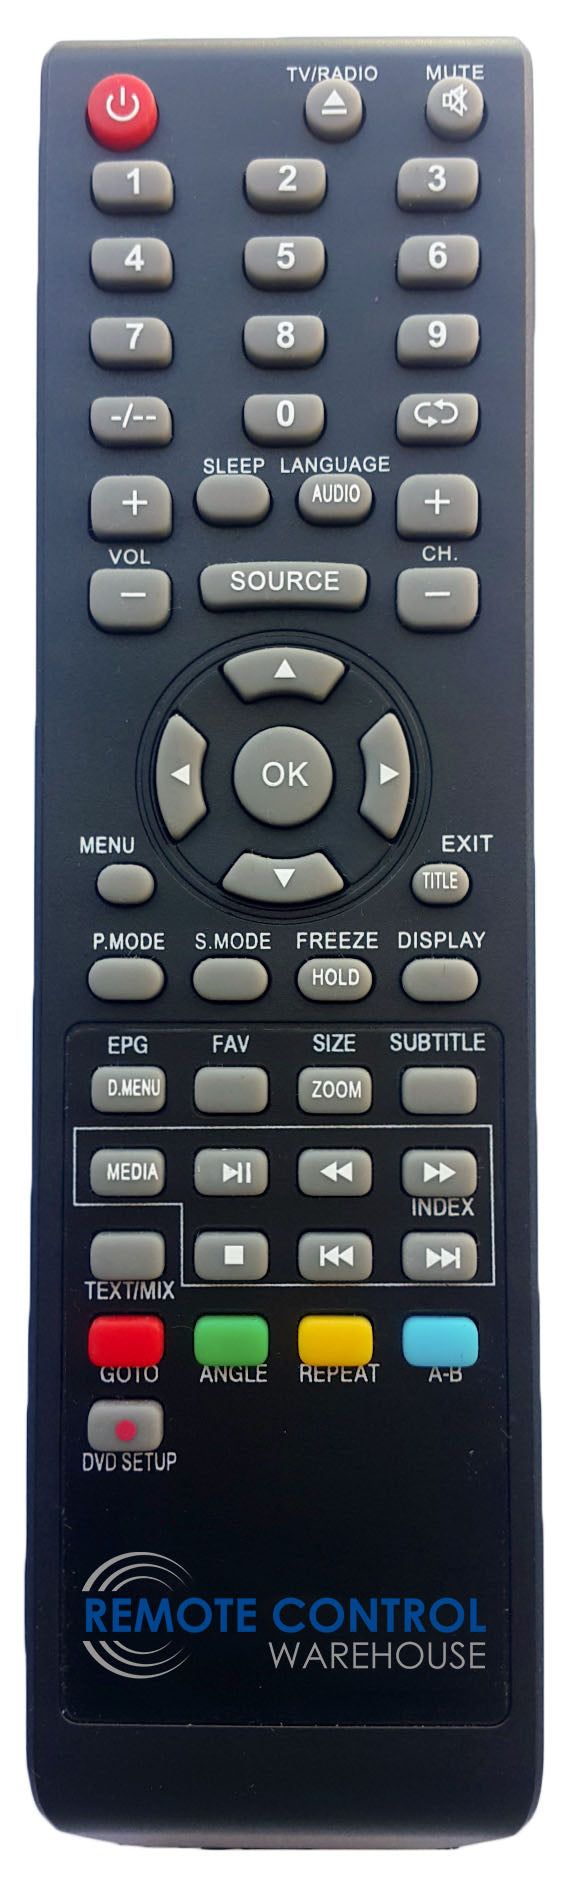 REPLACEMENT VIVID REMOTE CONTROL - AT-40HDC1 AT40HDC1 LCD TV - Remote Control Warehouse